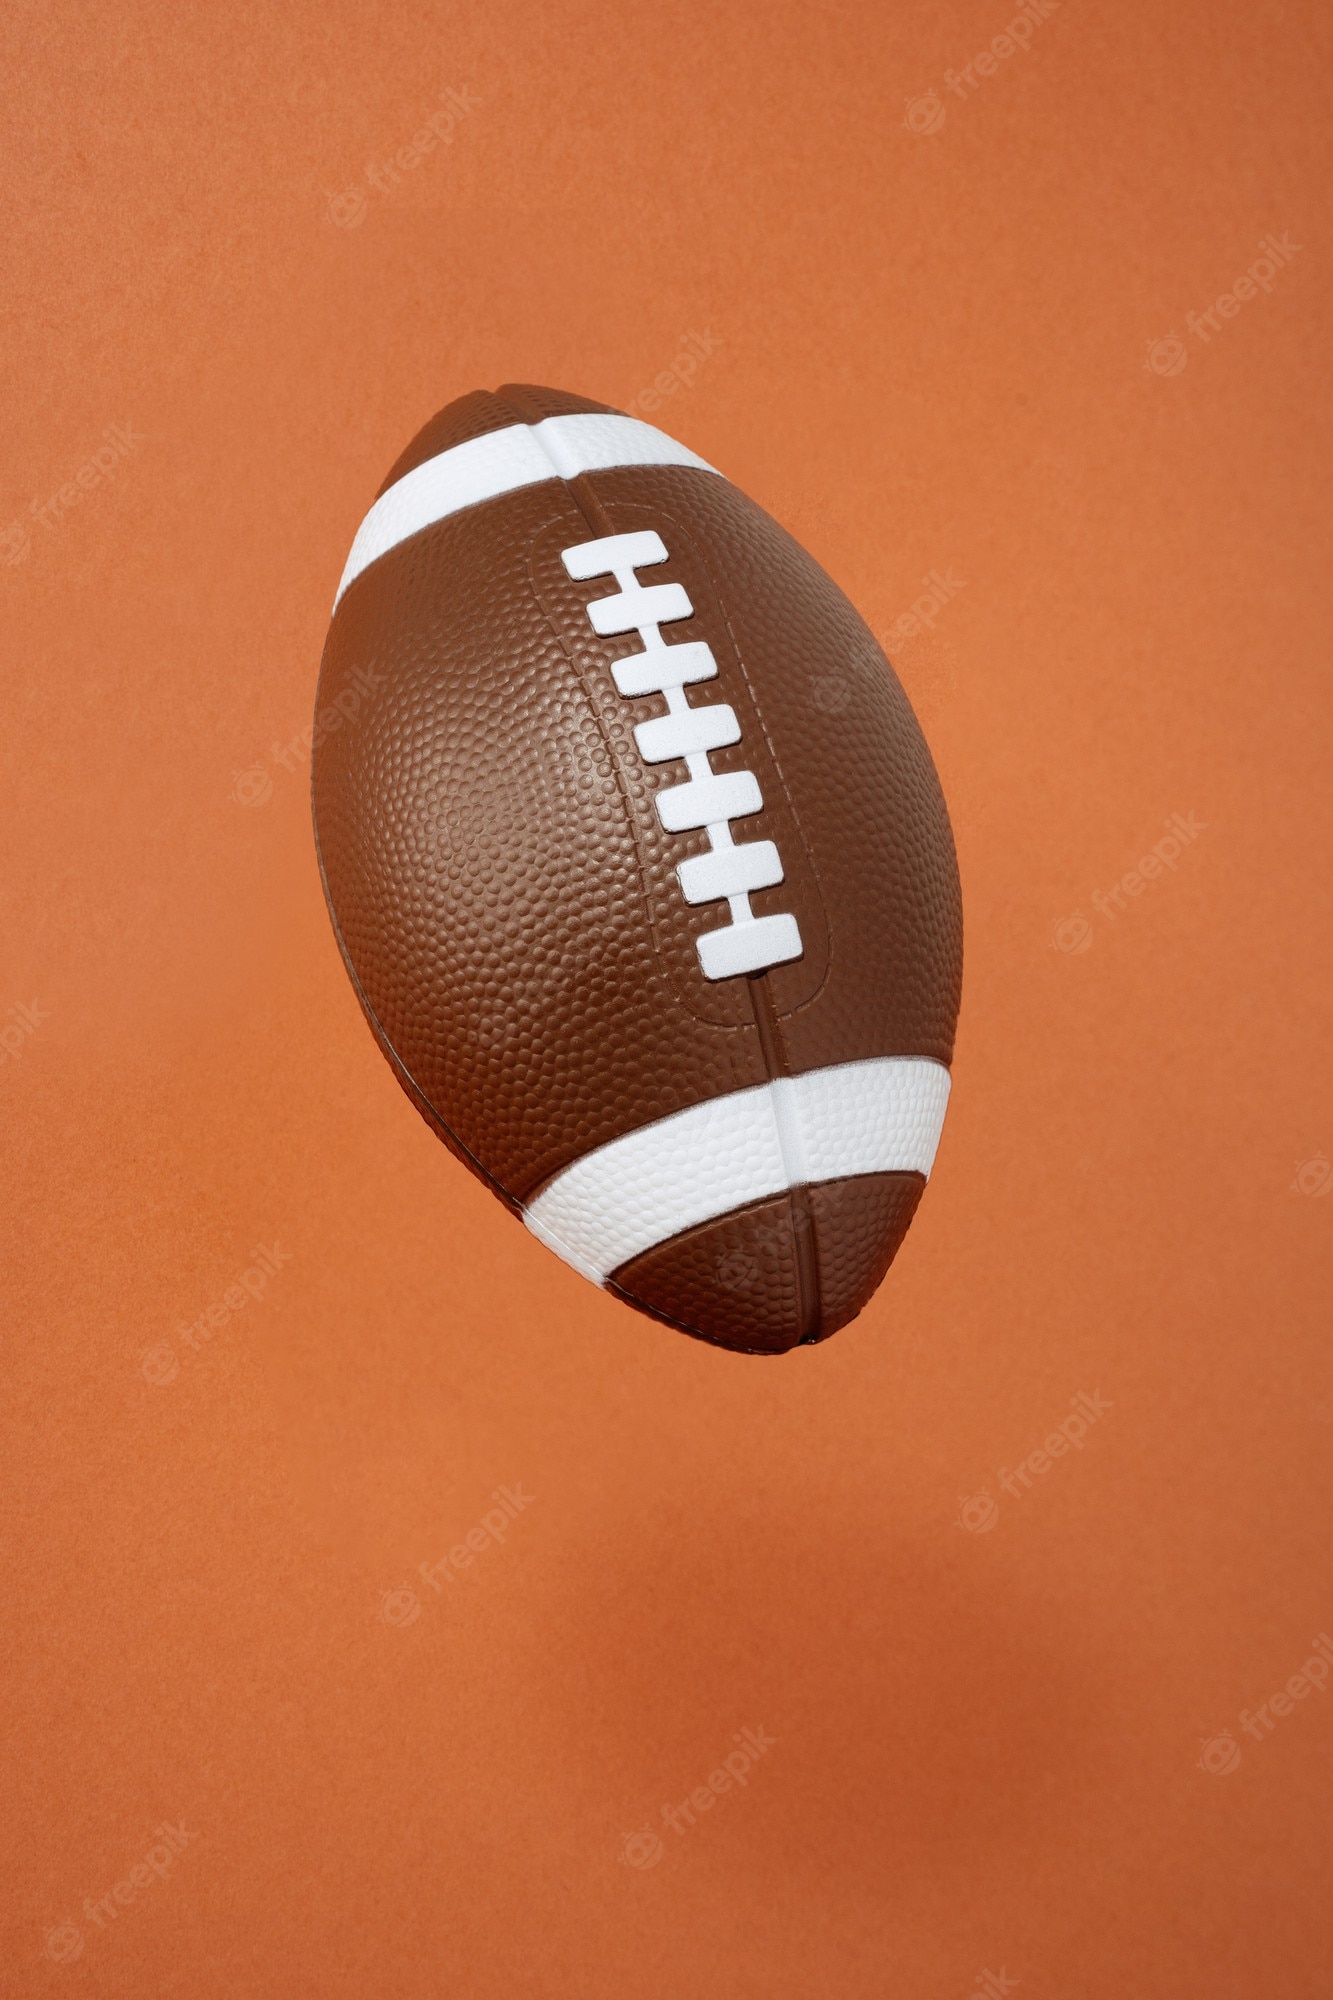 Premium Photo. American football on orange background. sport and competition. copy space. 3D illustration